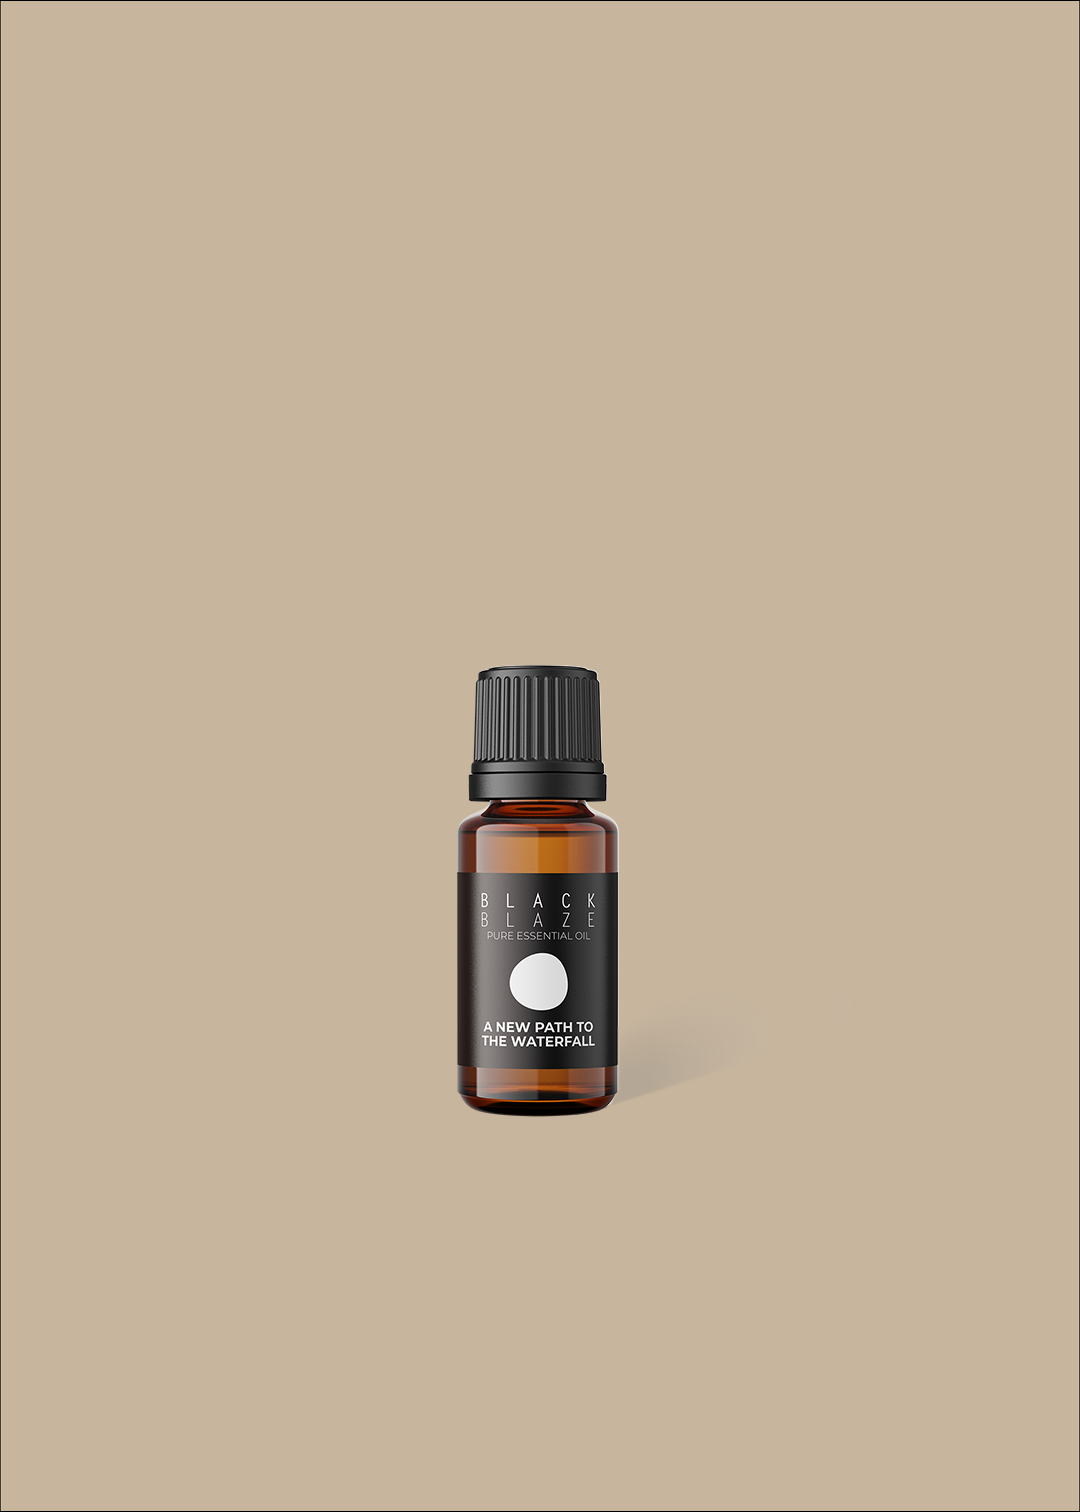 A New Path to The Waterfall Essential Oil